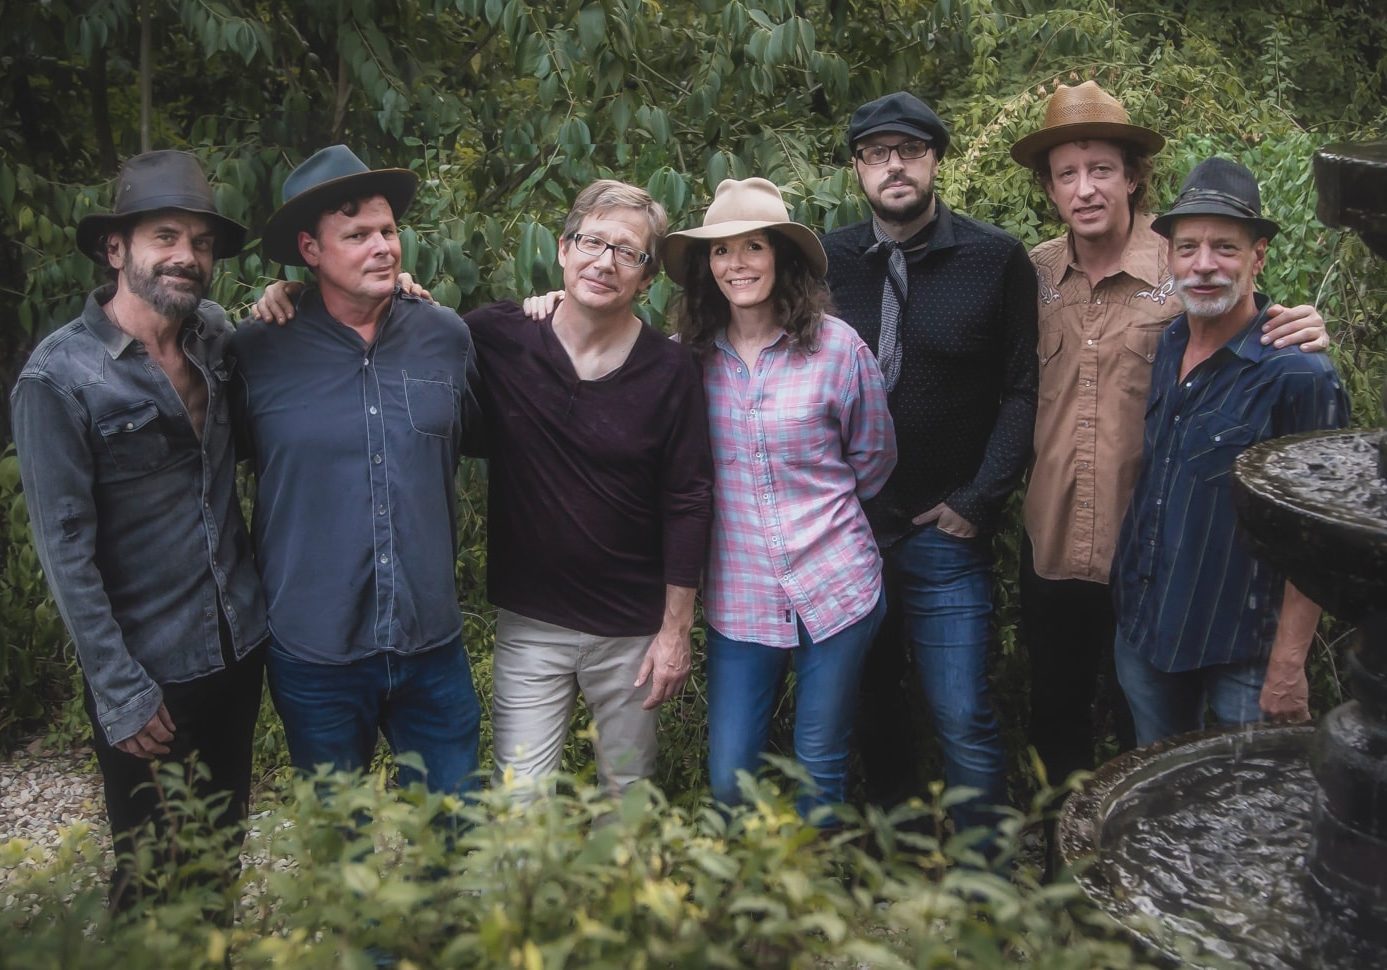 Video Premiere: Edie Brickell and New Bohemians “My Power”